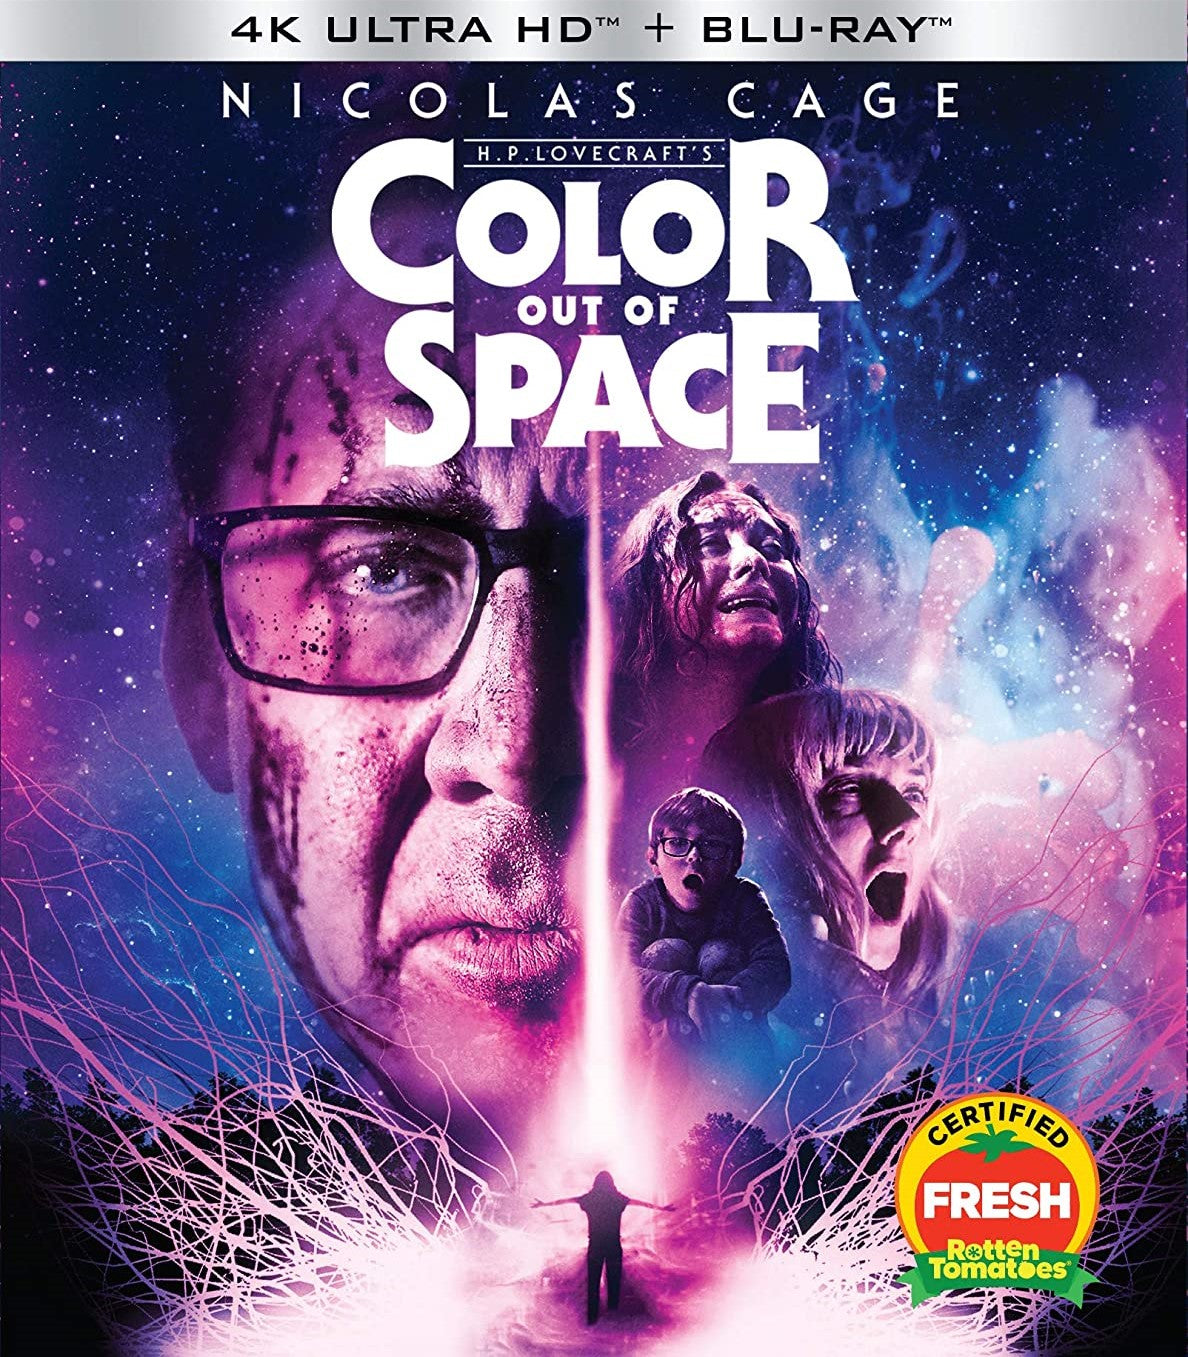 COLOR OUT OF SPACE 4K UHD/BLU-RAY